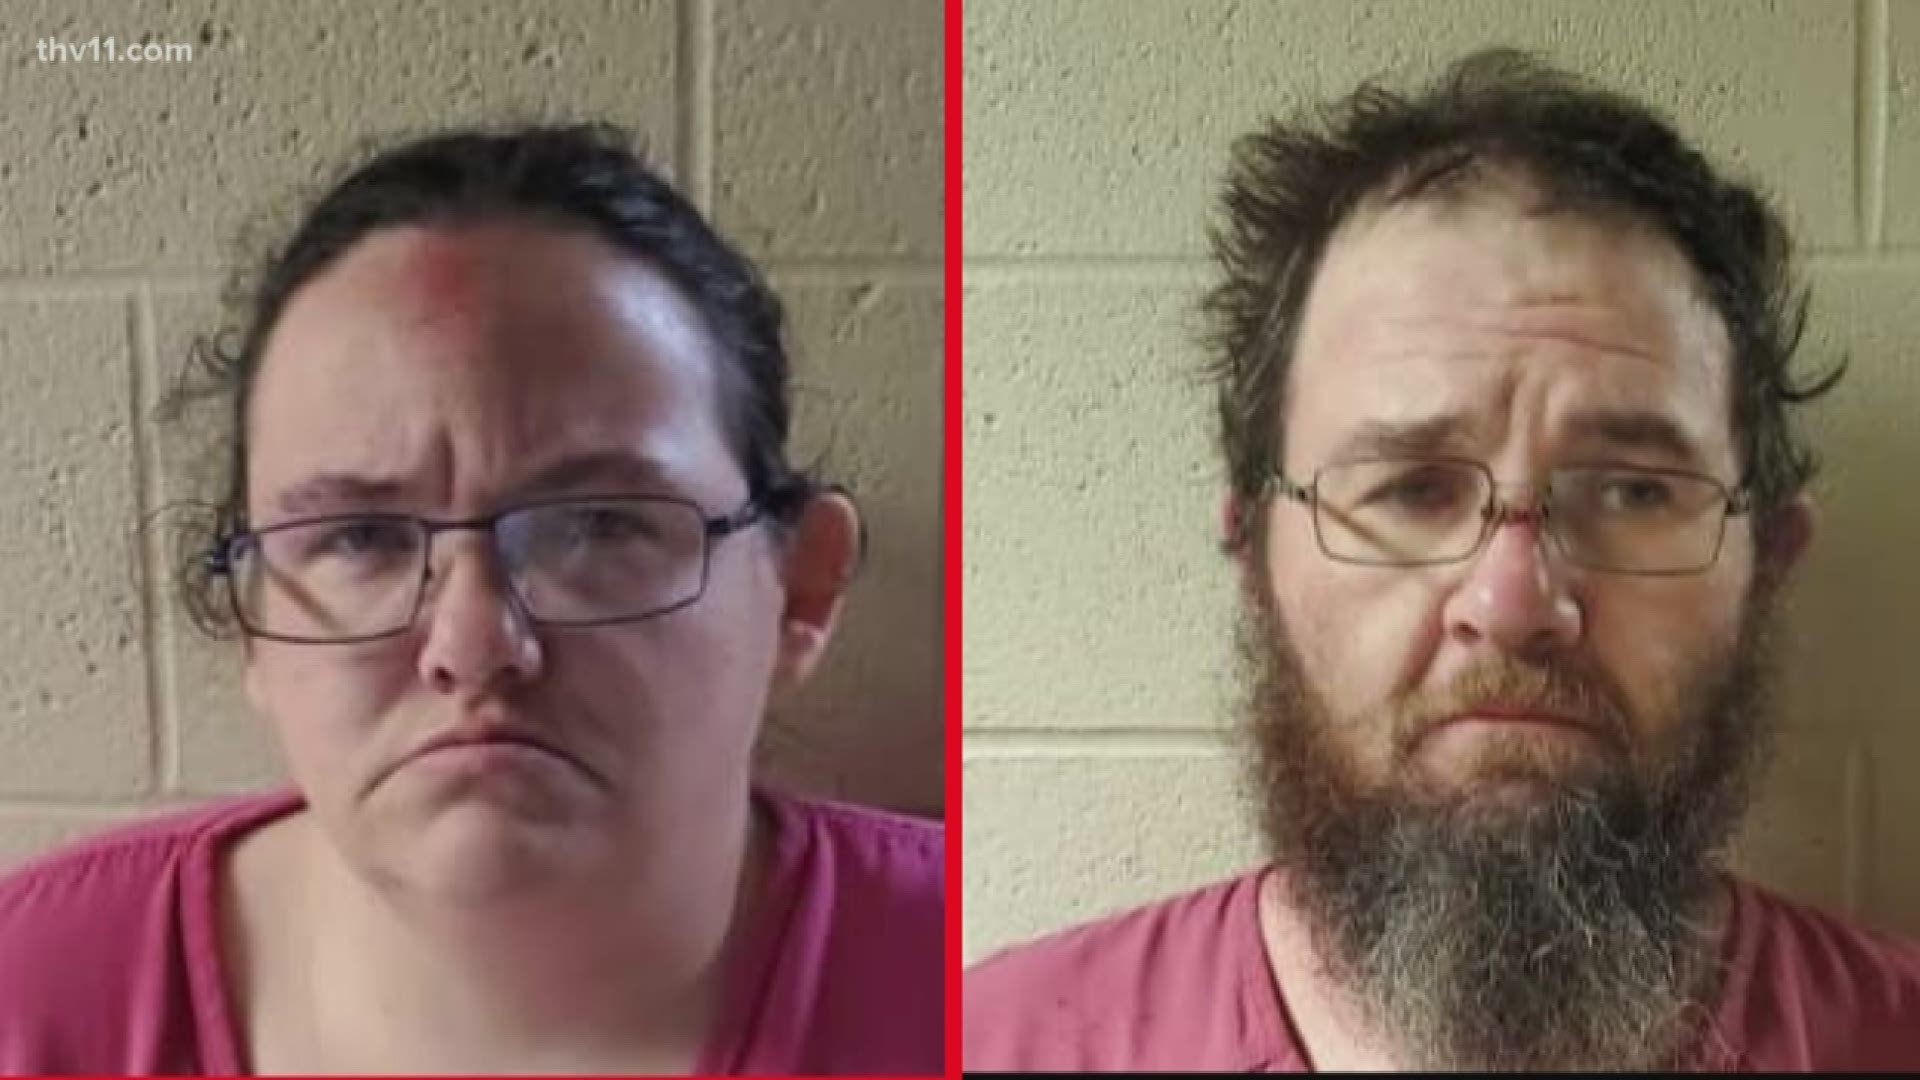 Police say 32-year-old Nessa Rogers and 35-year-old John Lampston have been arrested in connection to the murder of a child.